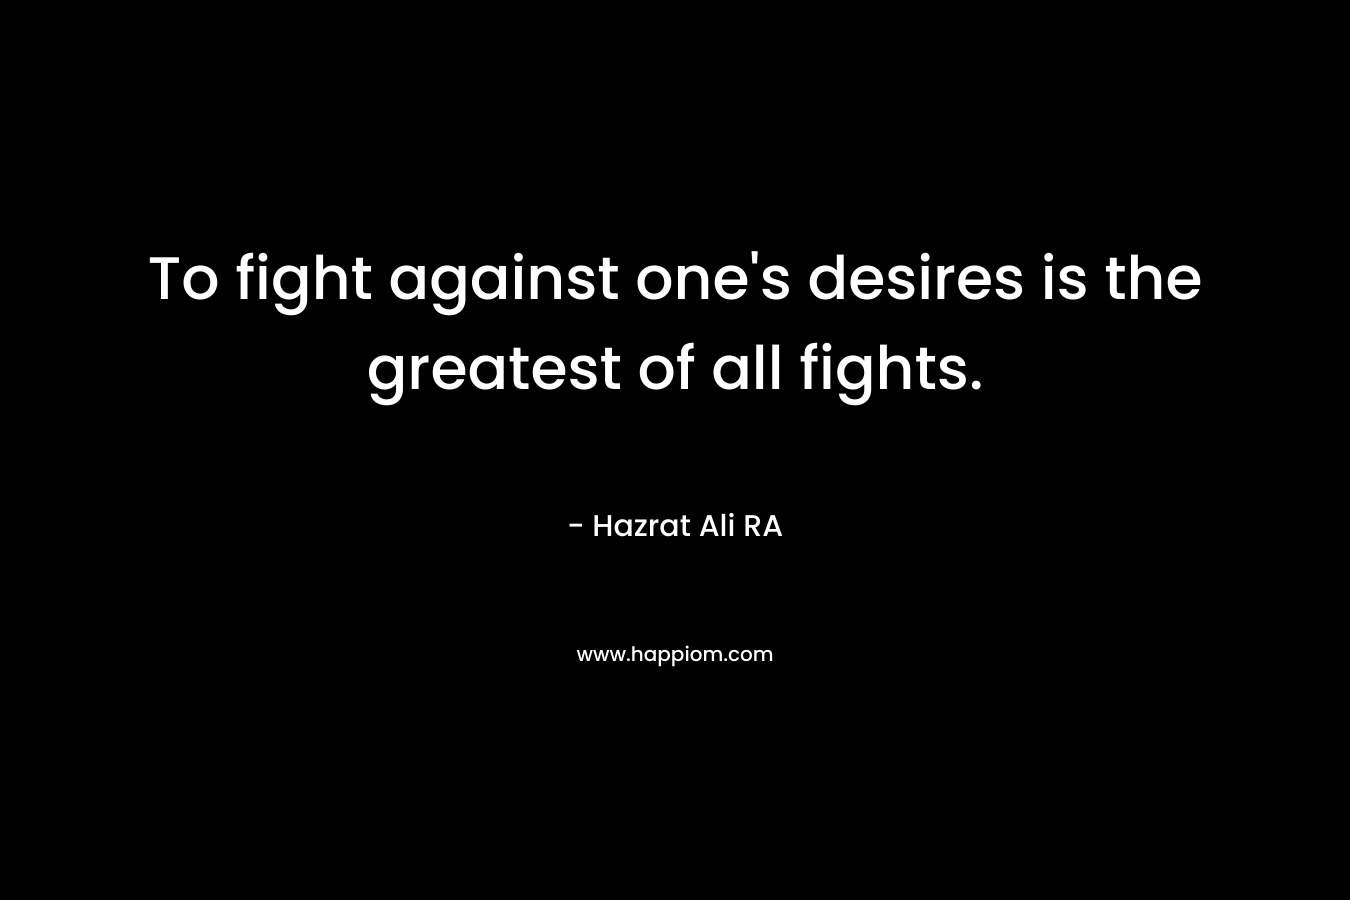 To fight against one’s desires is the greatest of all fights. – Hazrat Ali RA